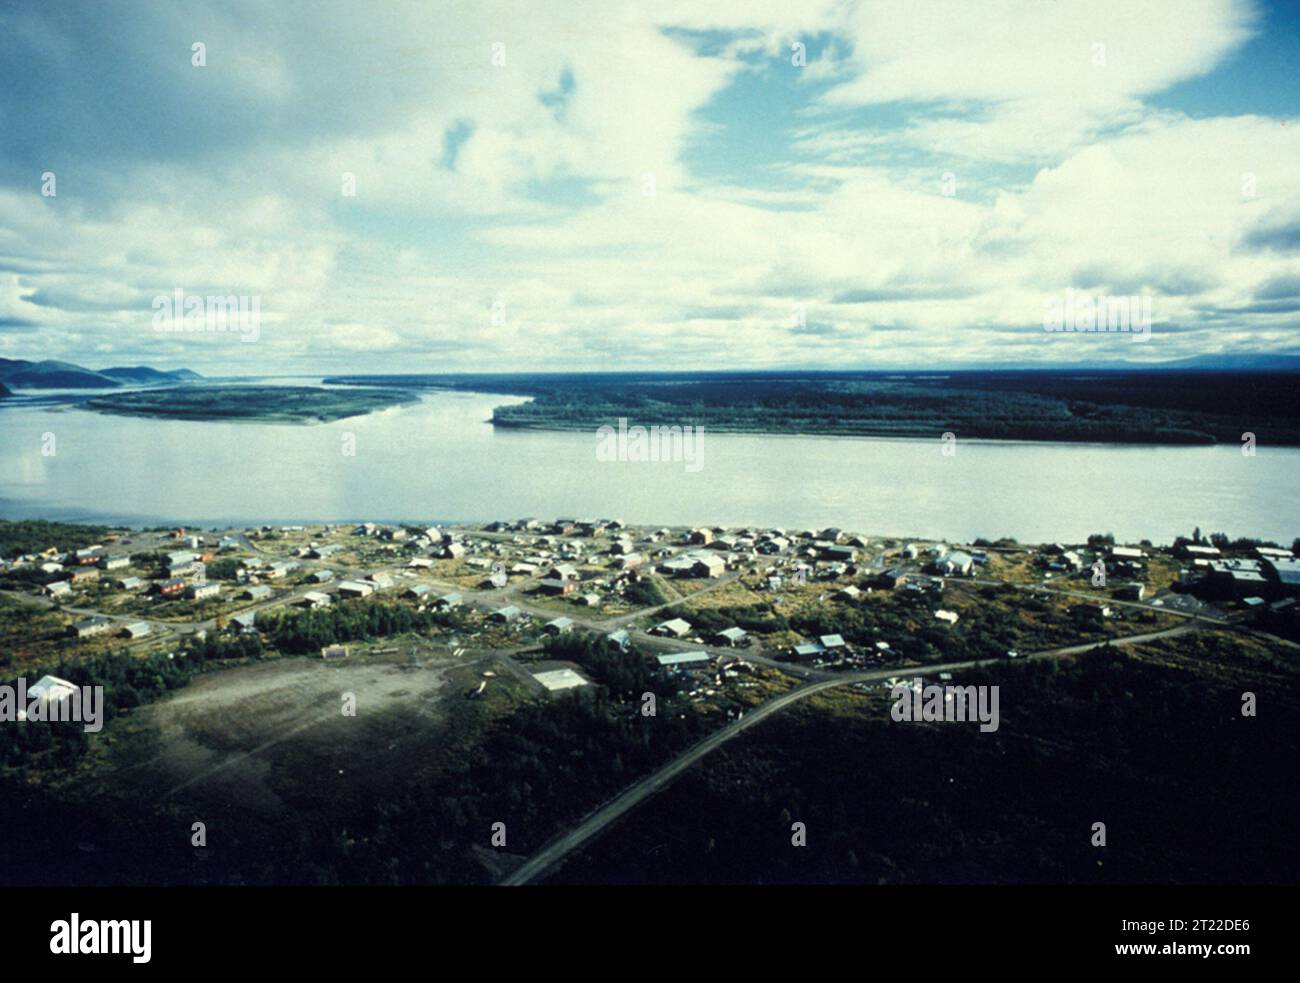 Aerial view of the village of Kaltag and the Yukon. Kaltag is located on the Yukon River near the Innoko National Wildlife Refuge. This village is a checkpoint for the Iditarod Trail Race. Subjects: Aerial photography photography; Villages; Villagess; Rivers and streams; Yukon River; Alaska.  . 1998 - 2011. Stock Photo